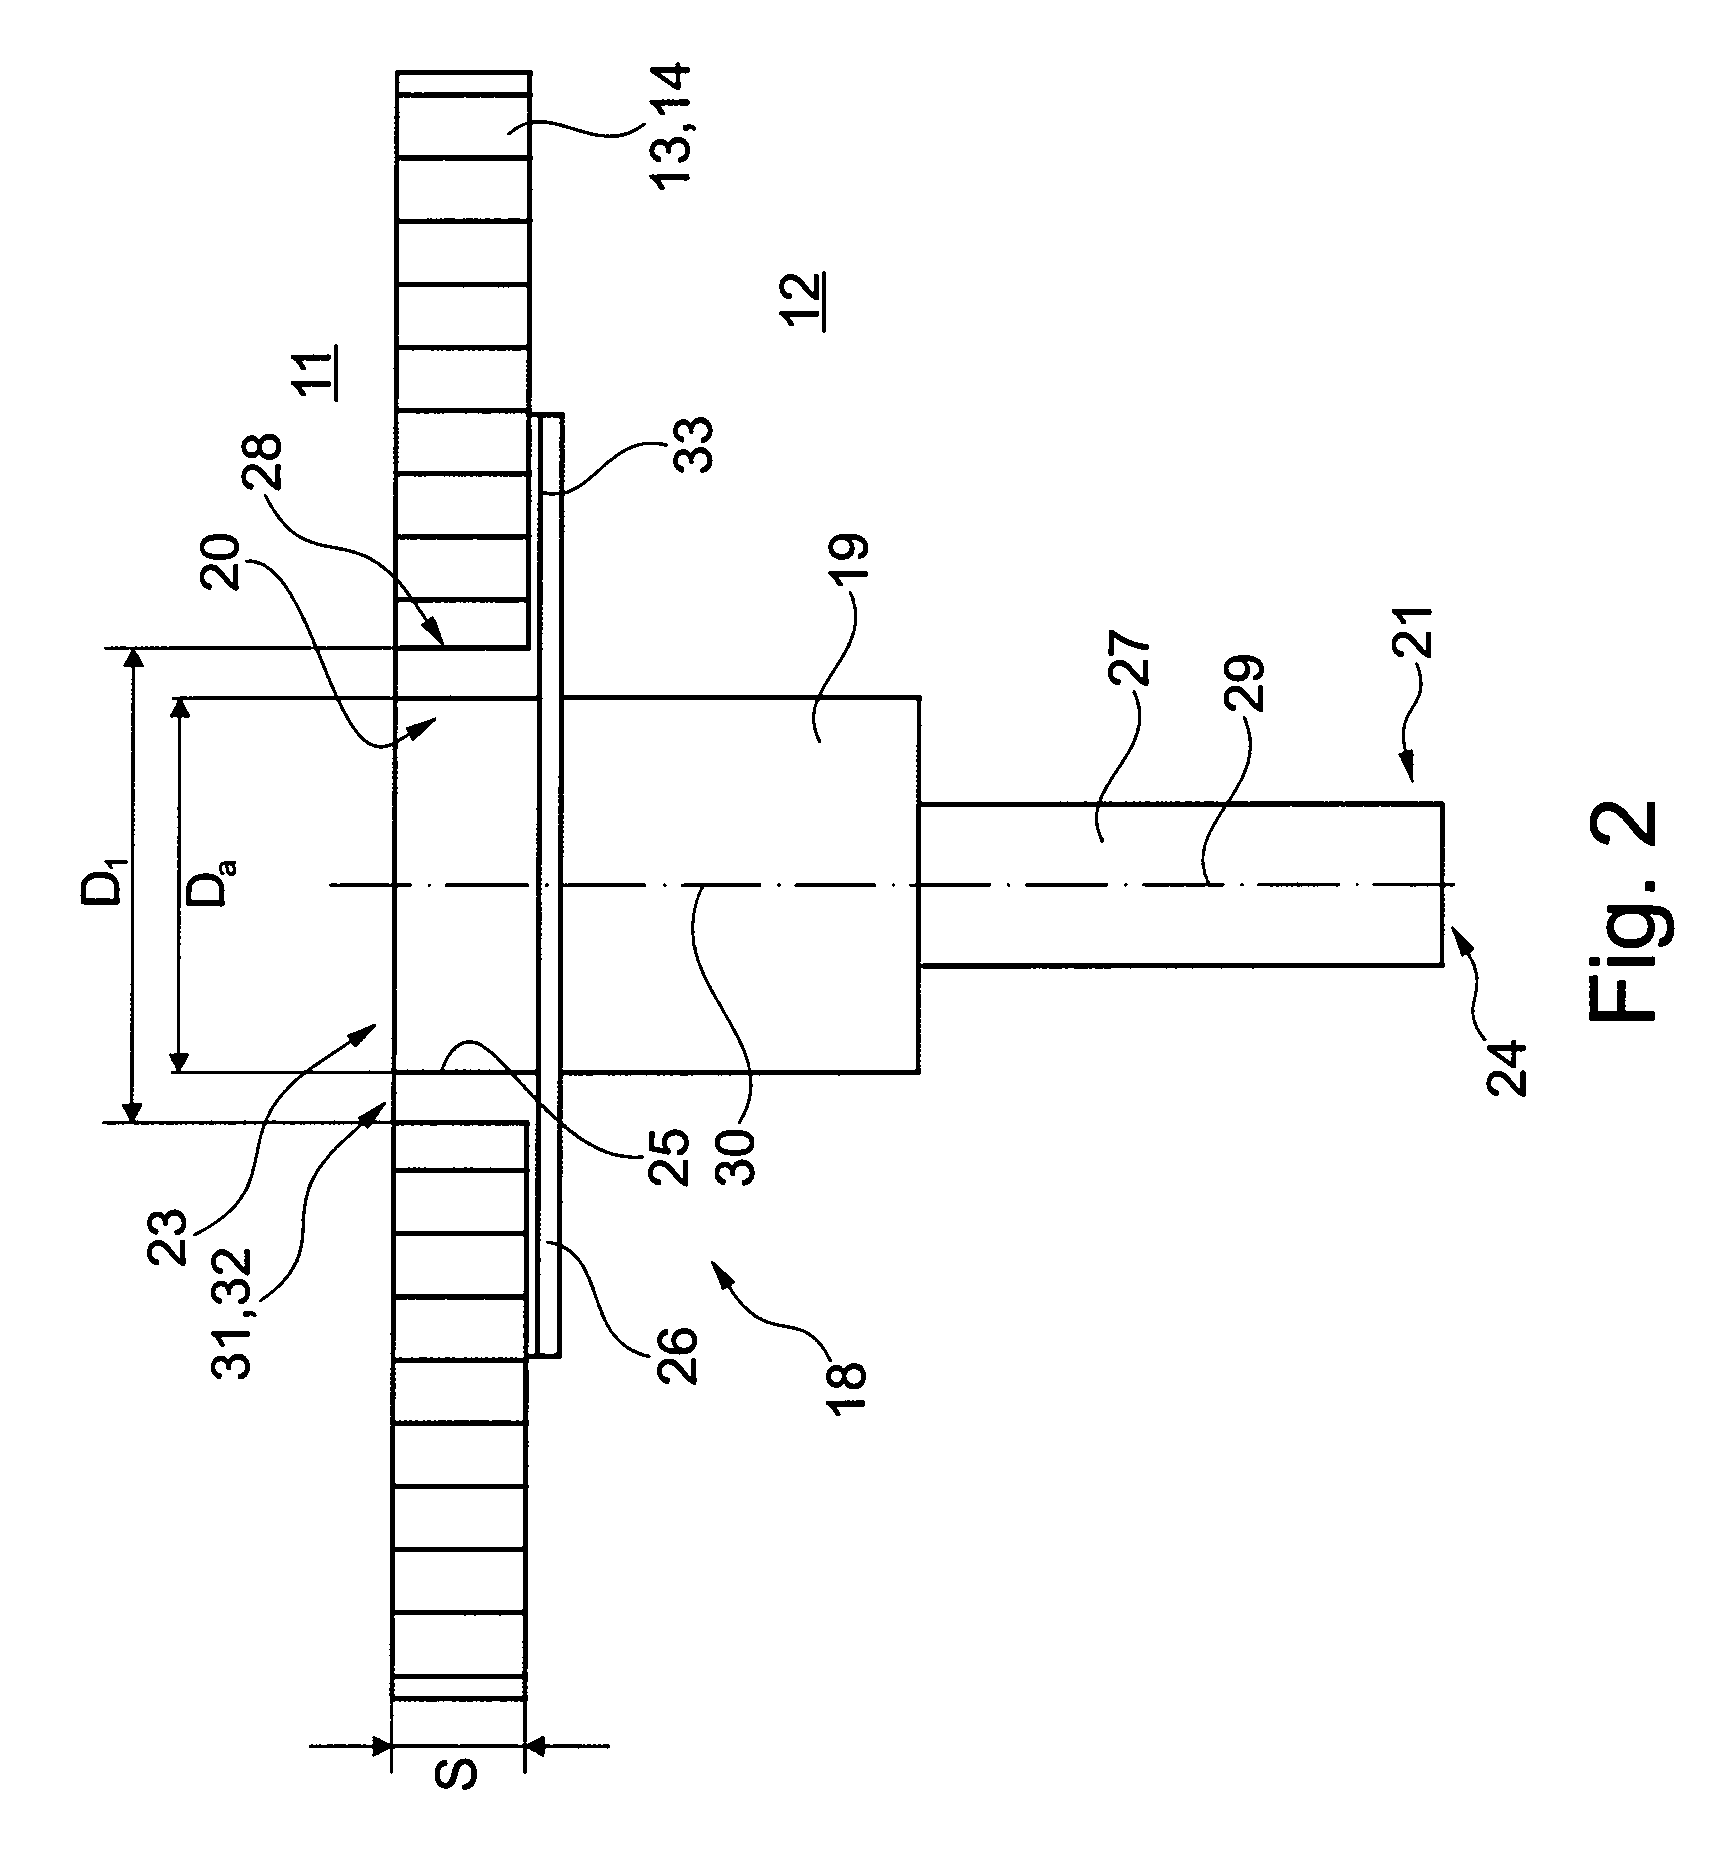 Aircraft with connection element for connecting a conduit system to cooling aggregates in aircraft cabins